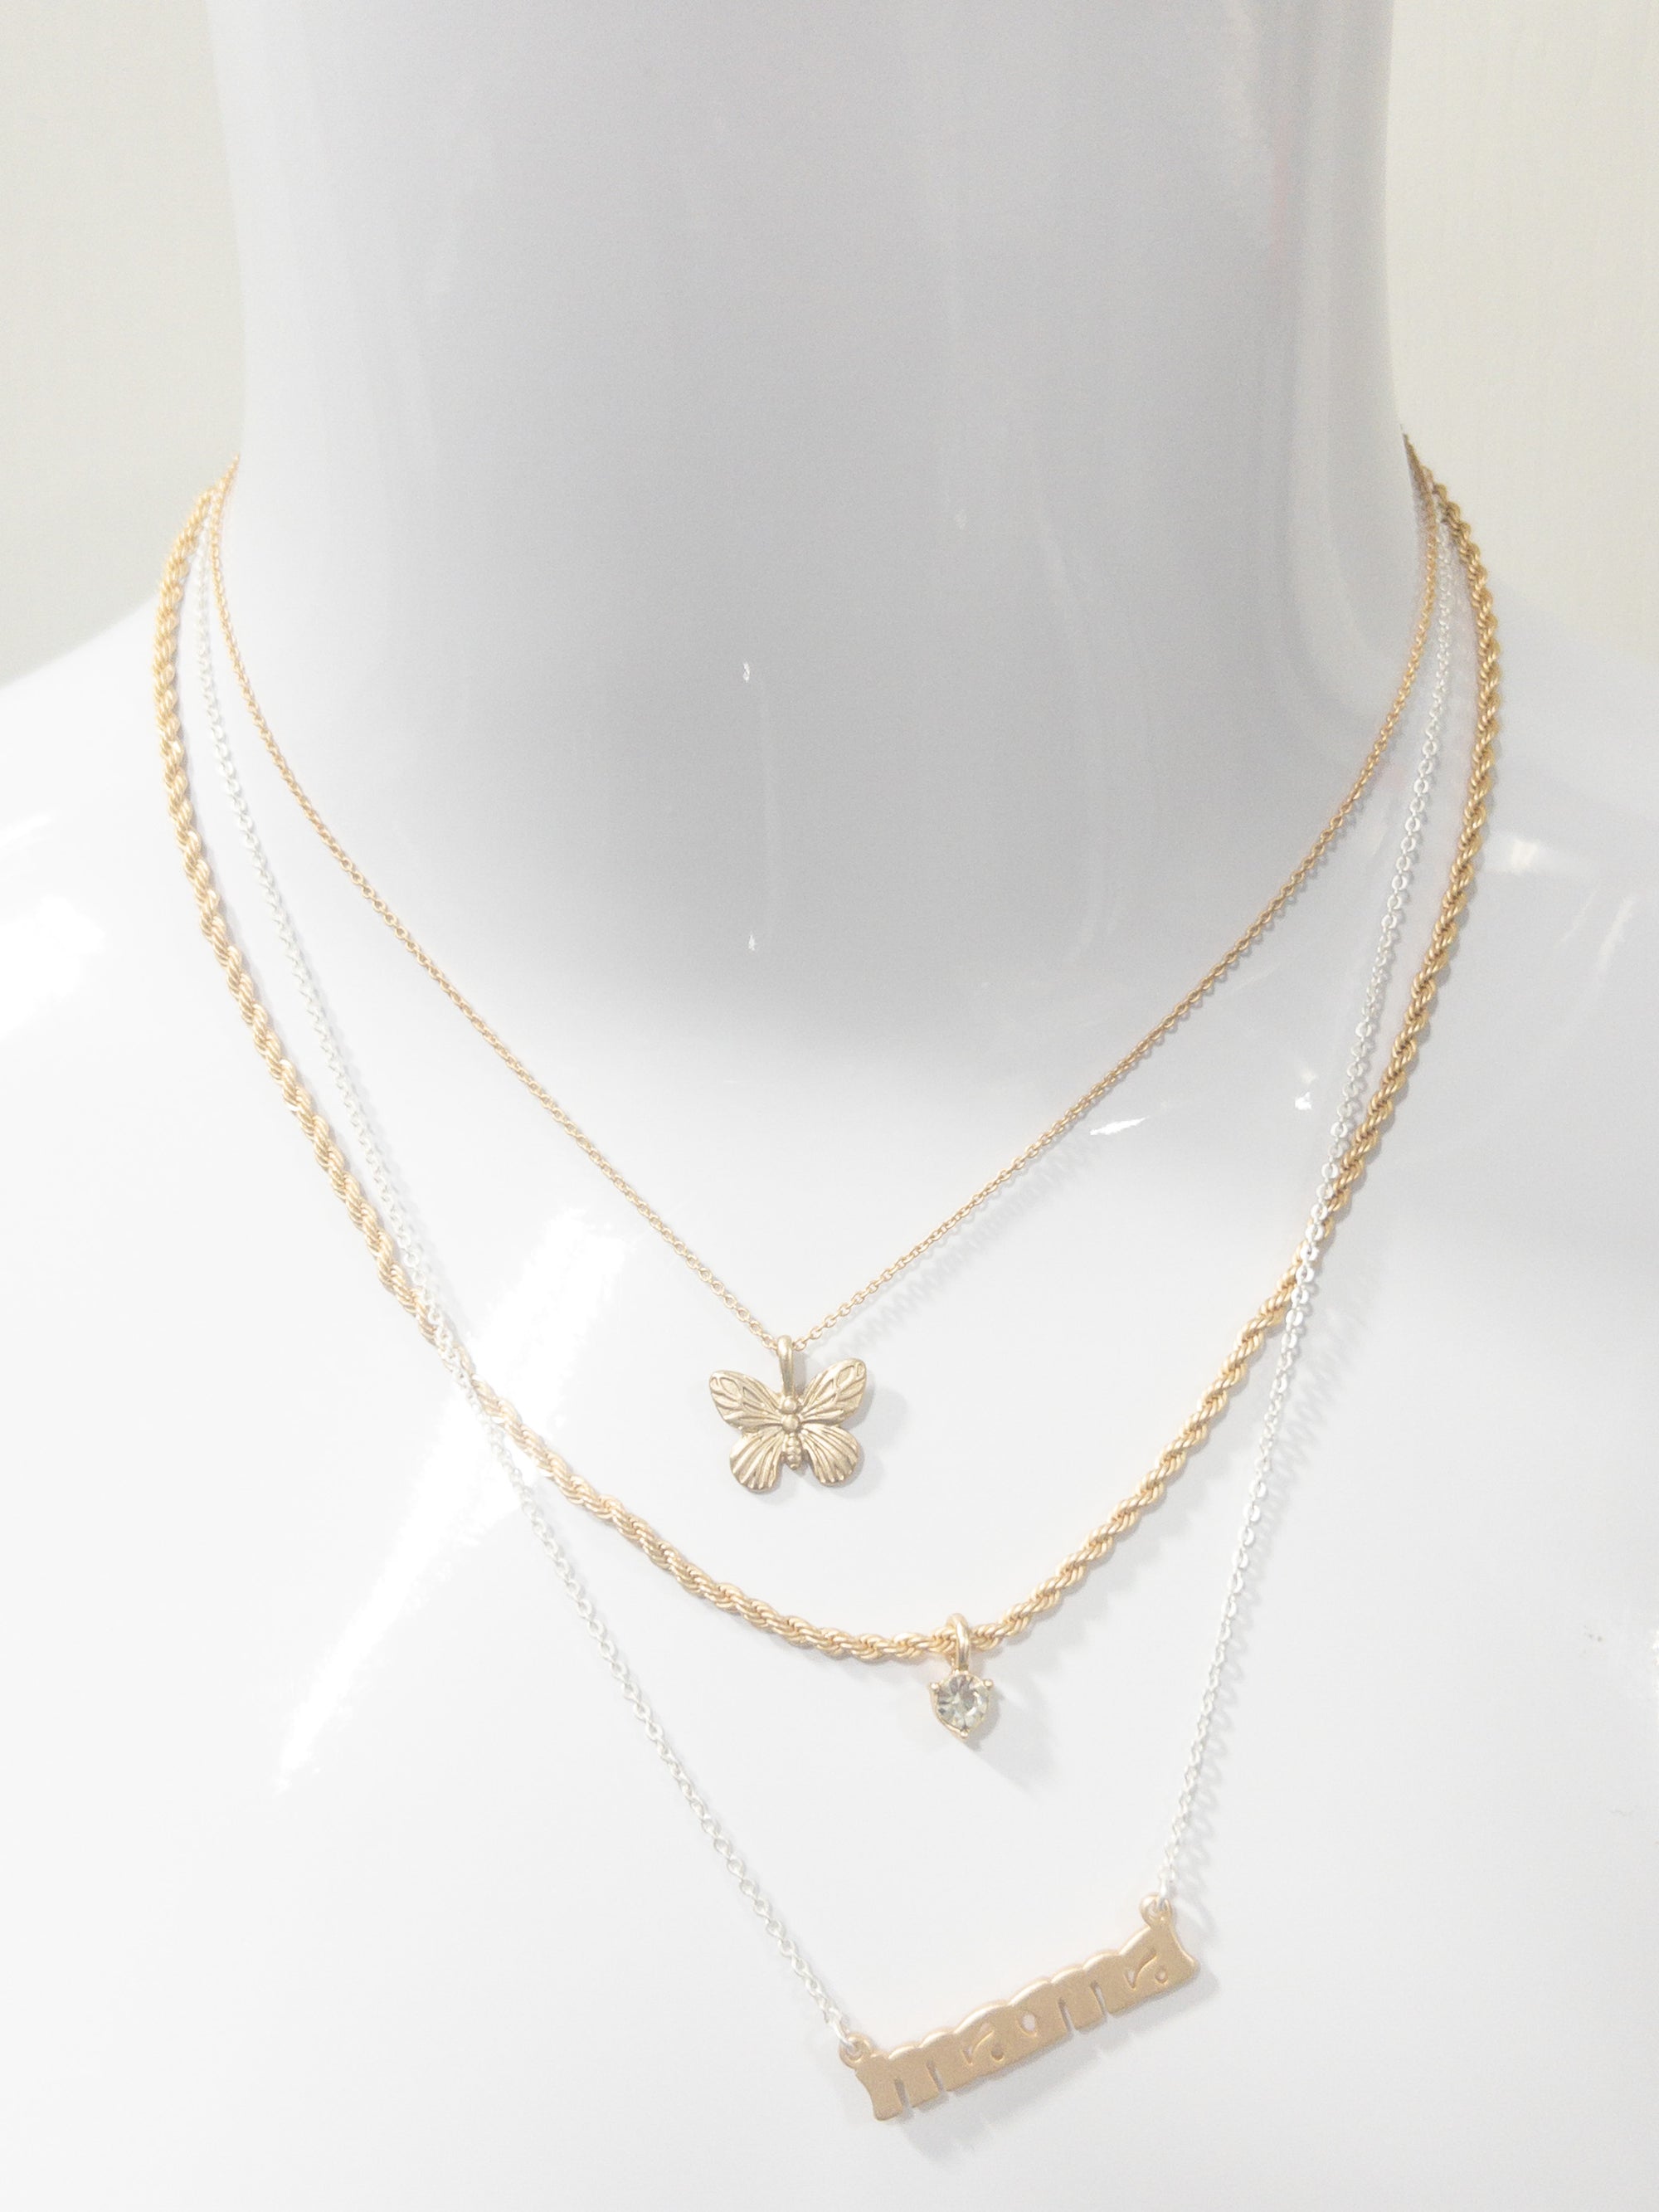 3 STRAND, GOLD BUTTERFLY, CLEAR CRYSTAL DROP, GOLD "MAMA" BAR NECKLACE